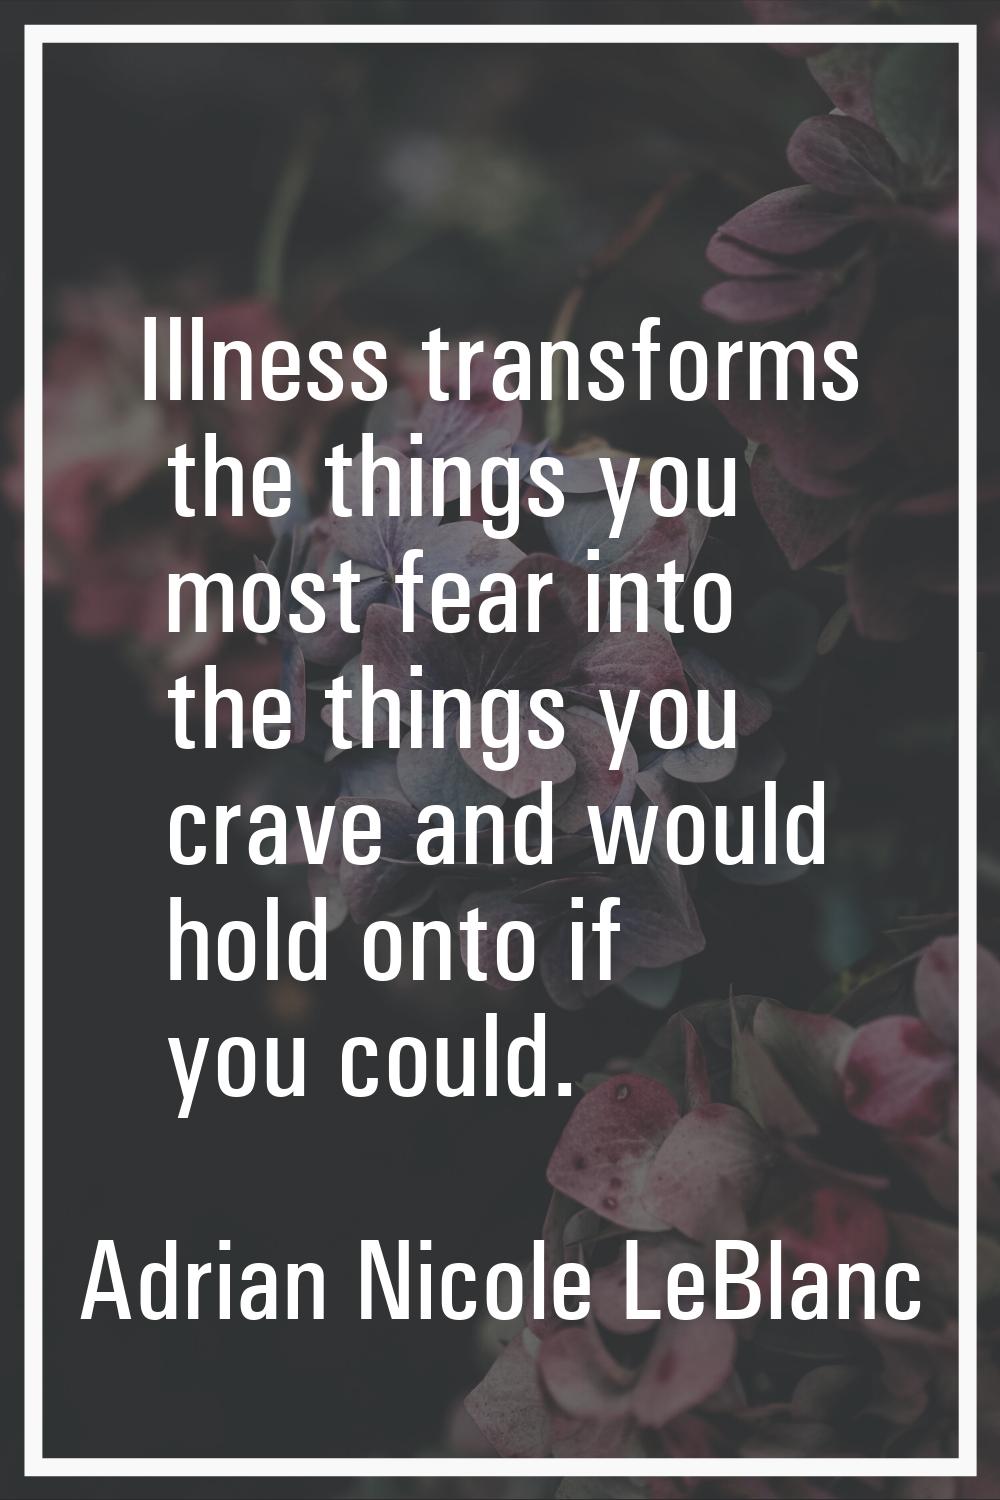 Illness transforms the things you most fear into the things you crave and would hold onto if you co